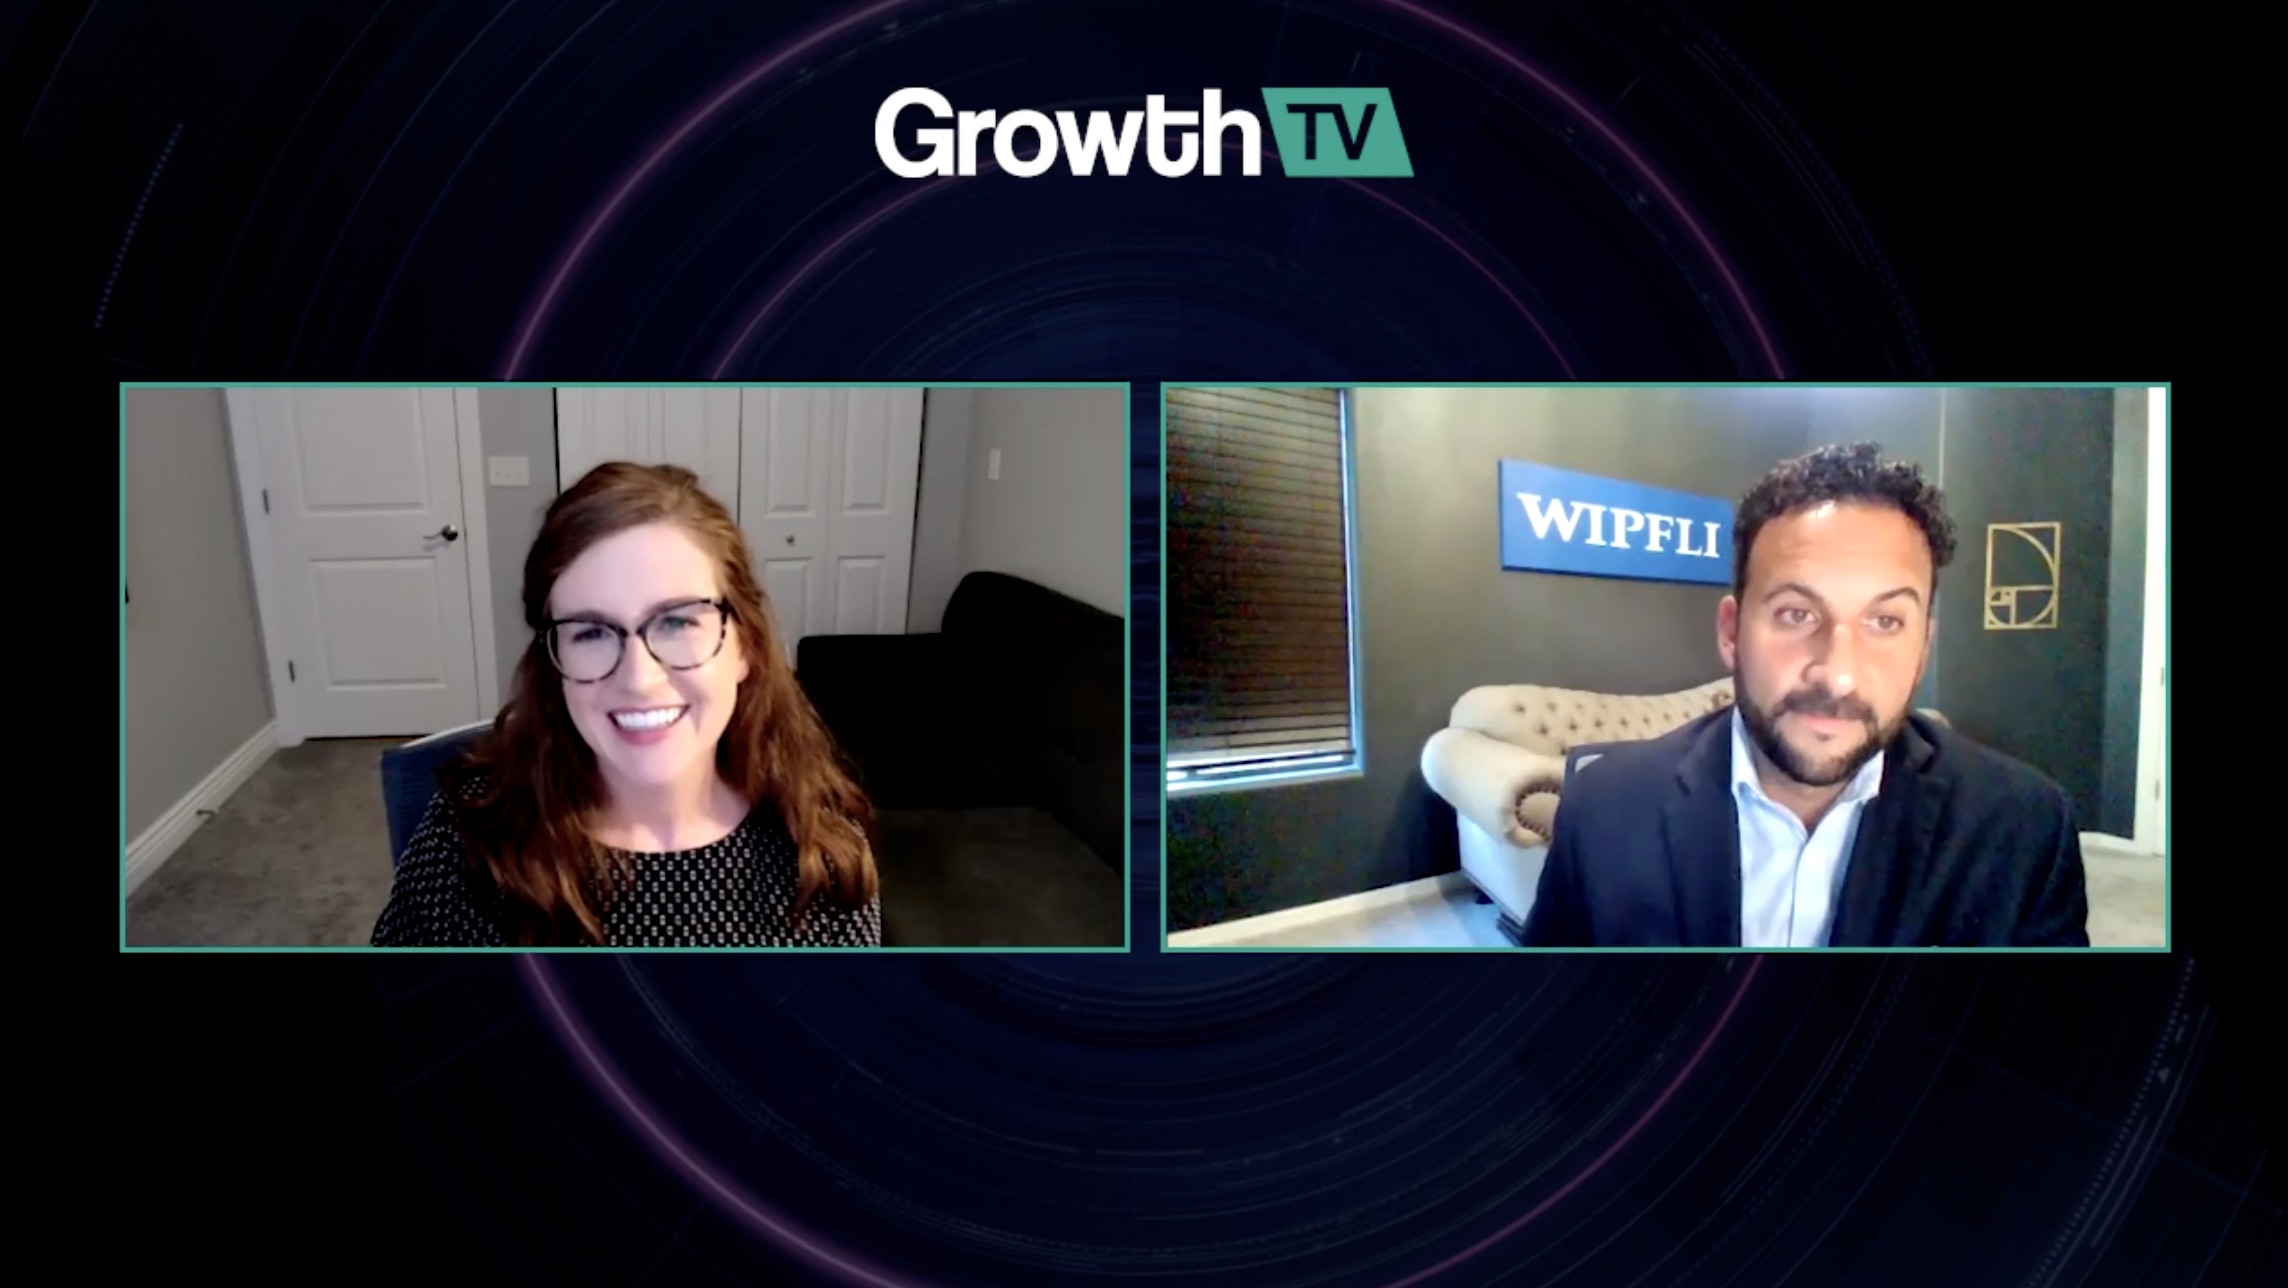 growthtv-wipfli-fraud-due-diligence-m-a-deal